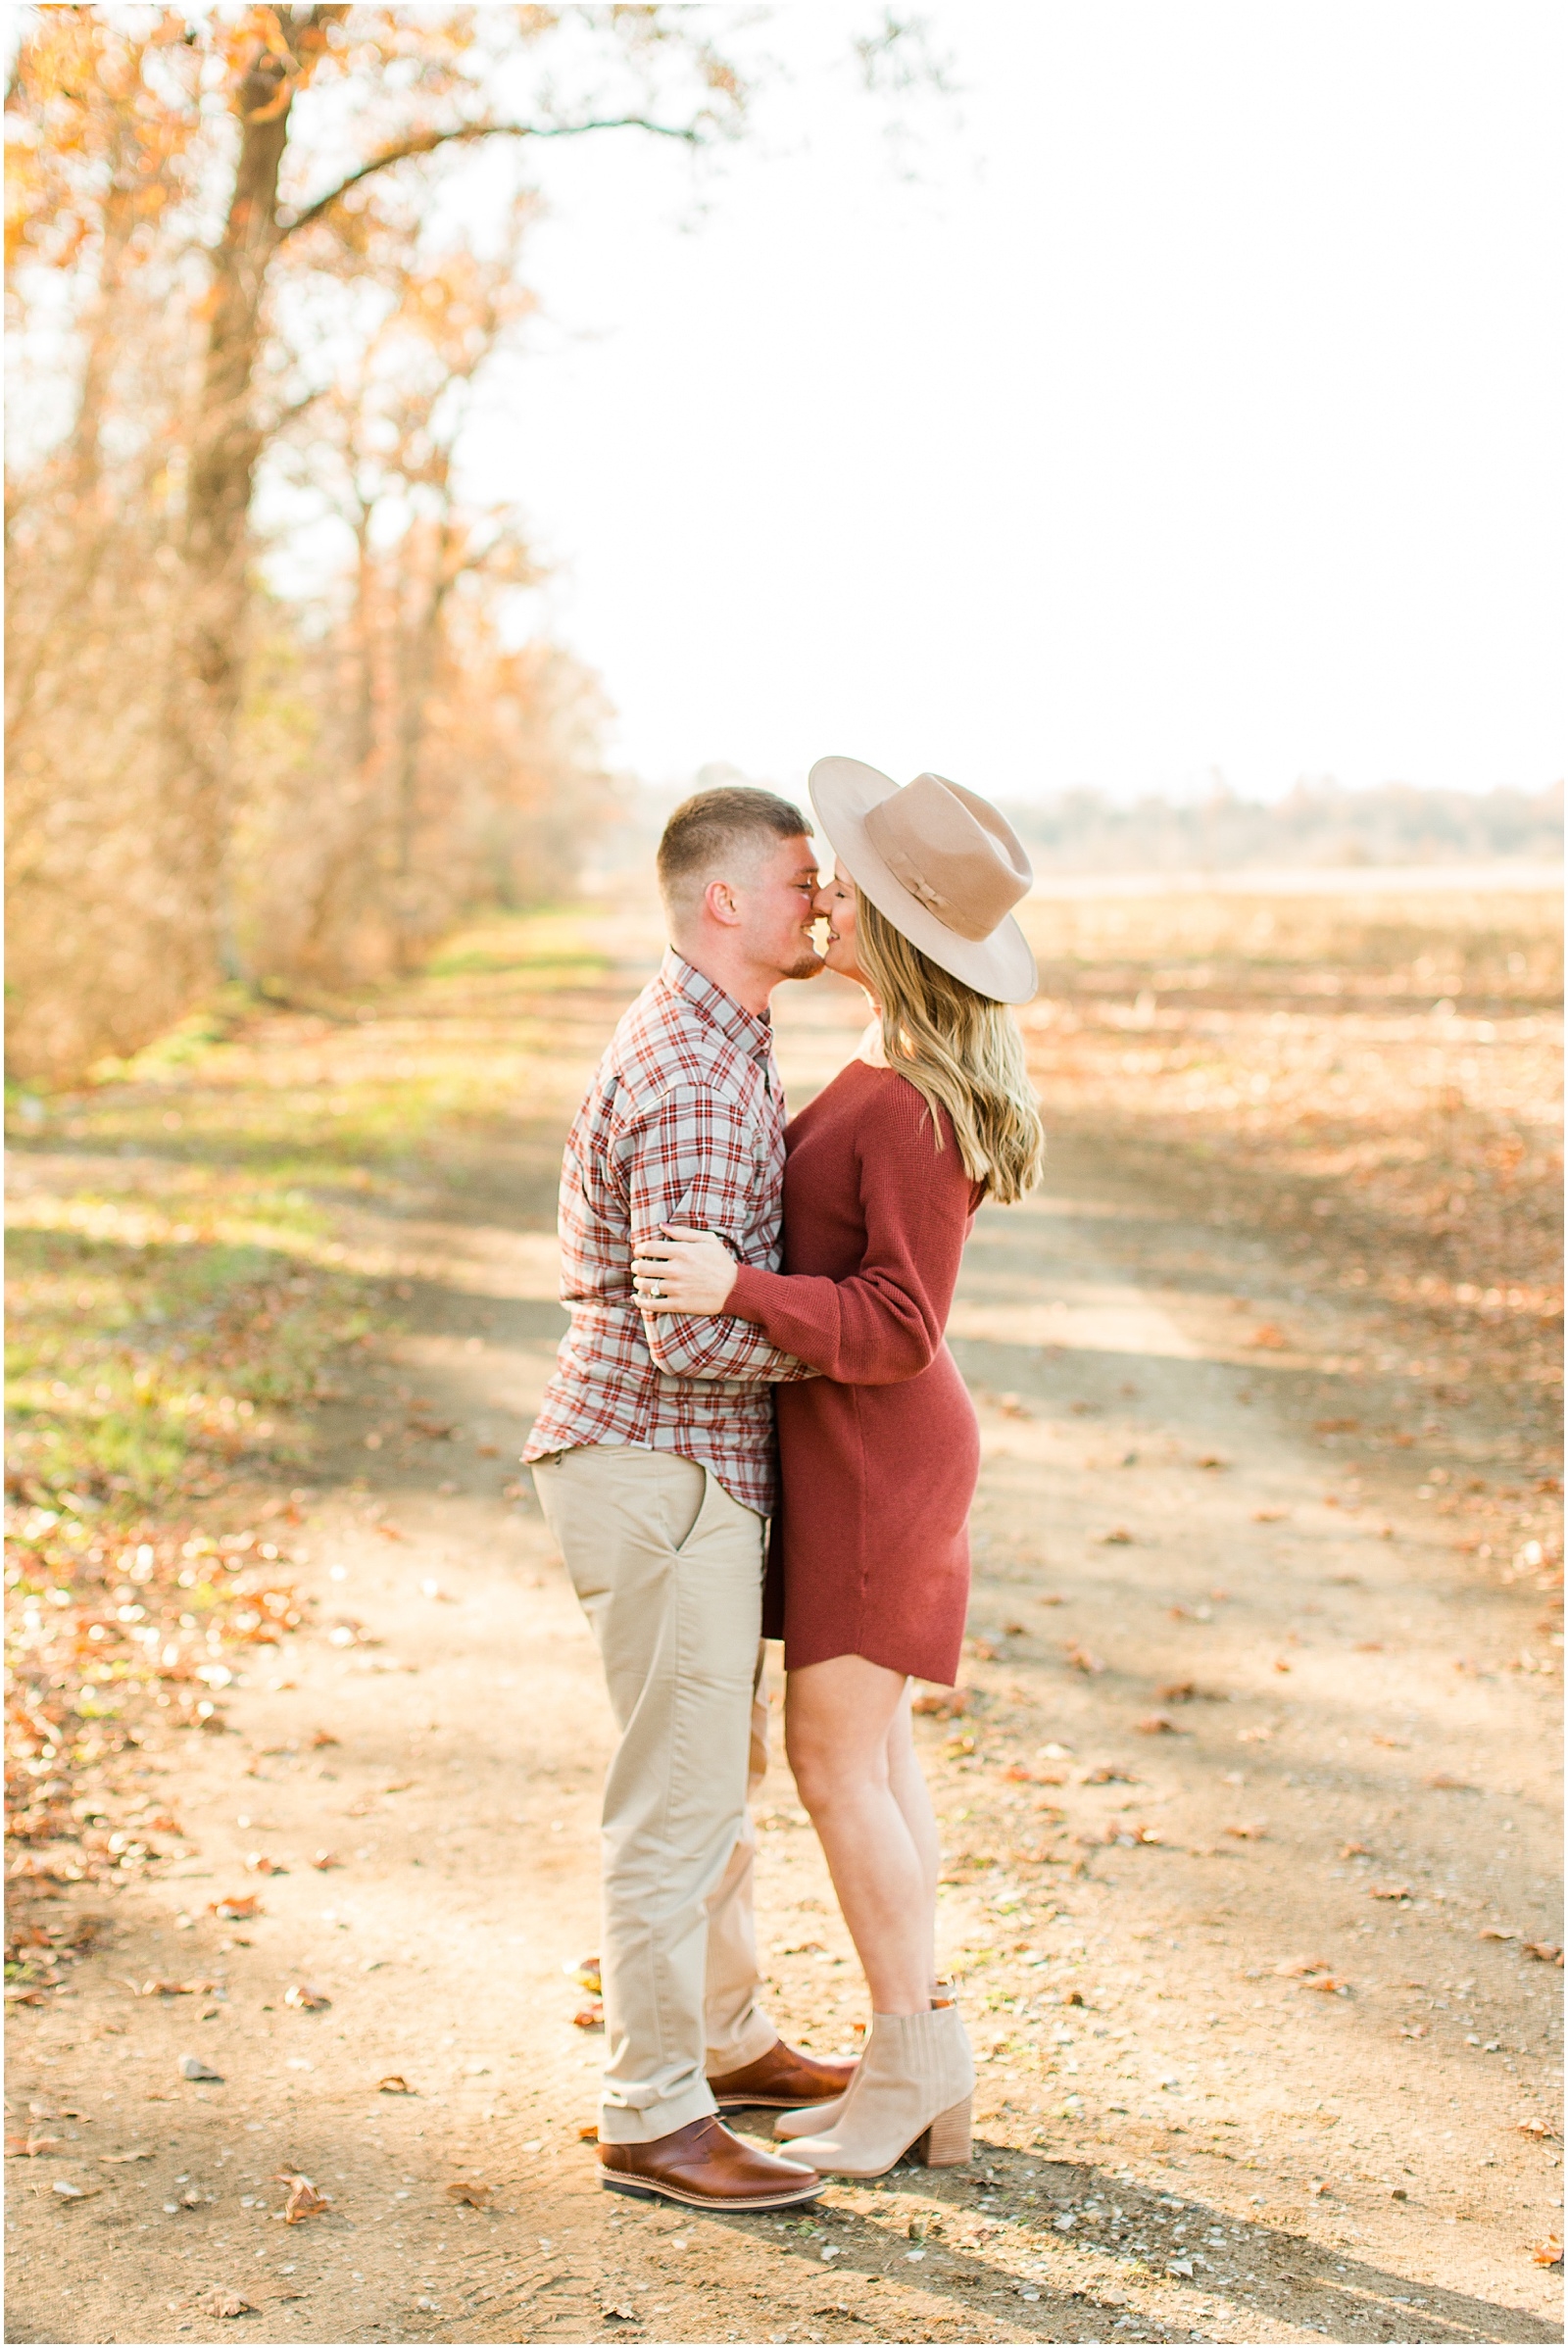 A Fall Southern Indiana Engagement Seesion | Cody and Hannah | Bret and Brandie Photography 012.jpg